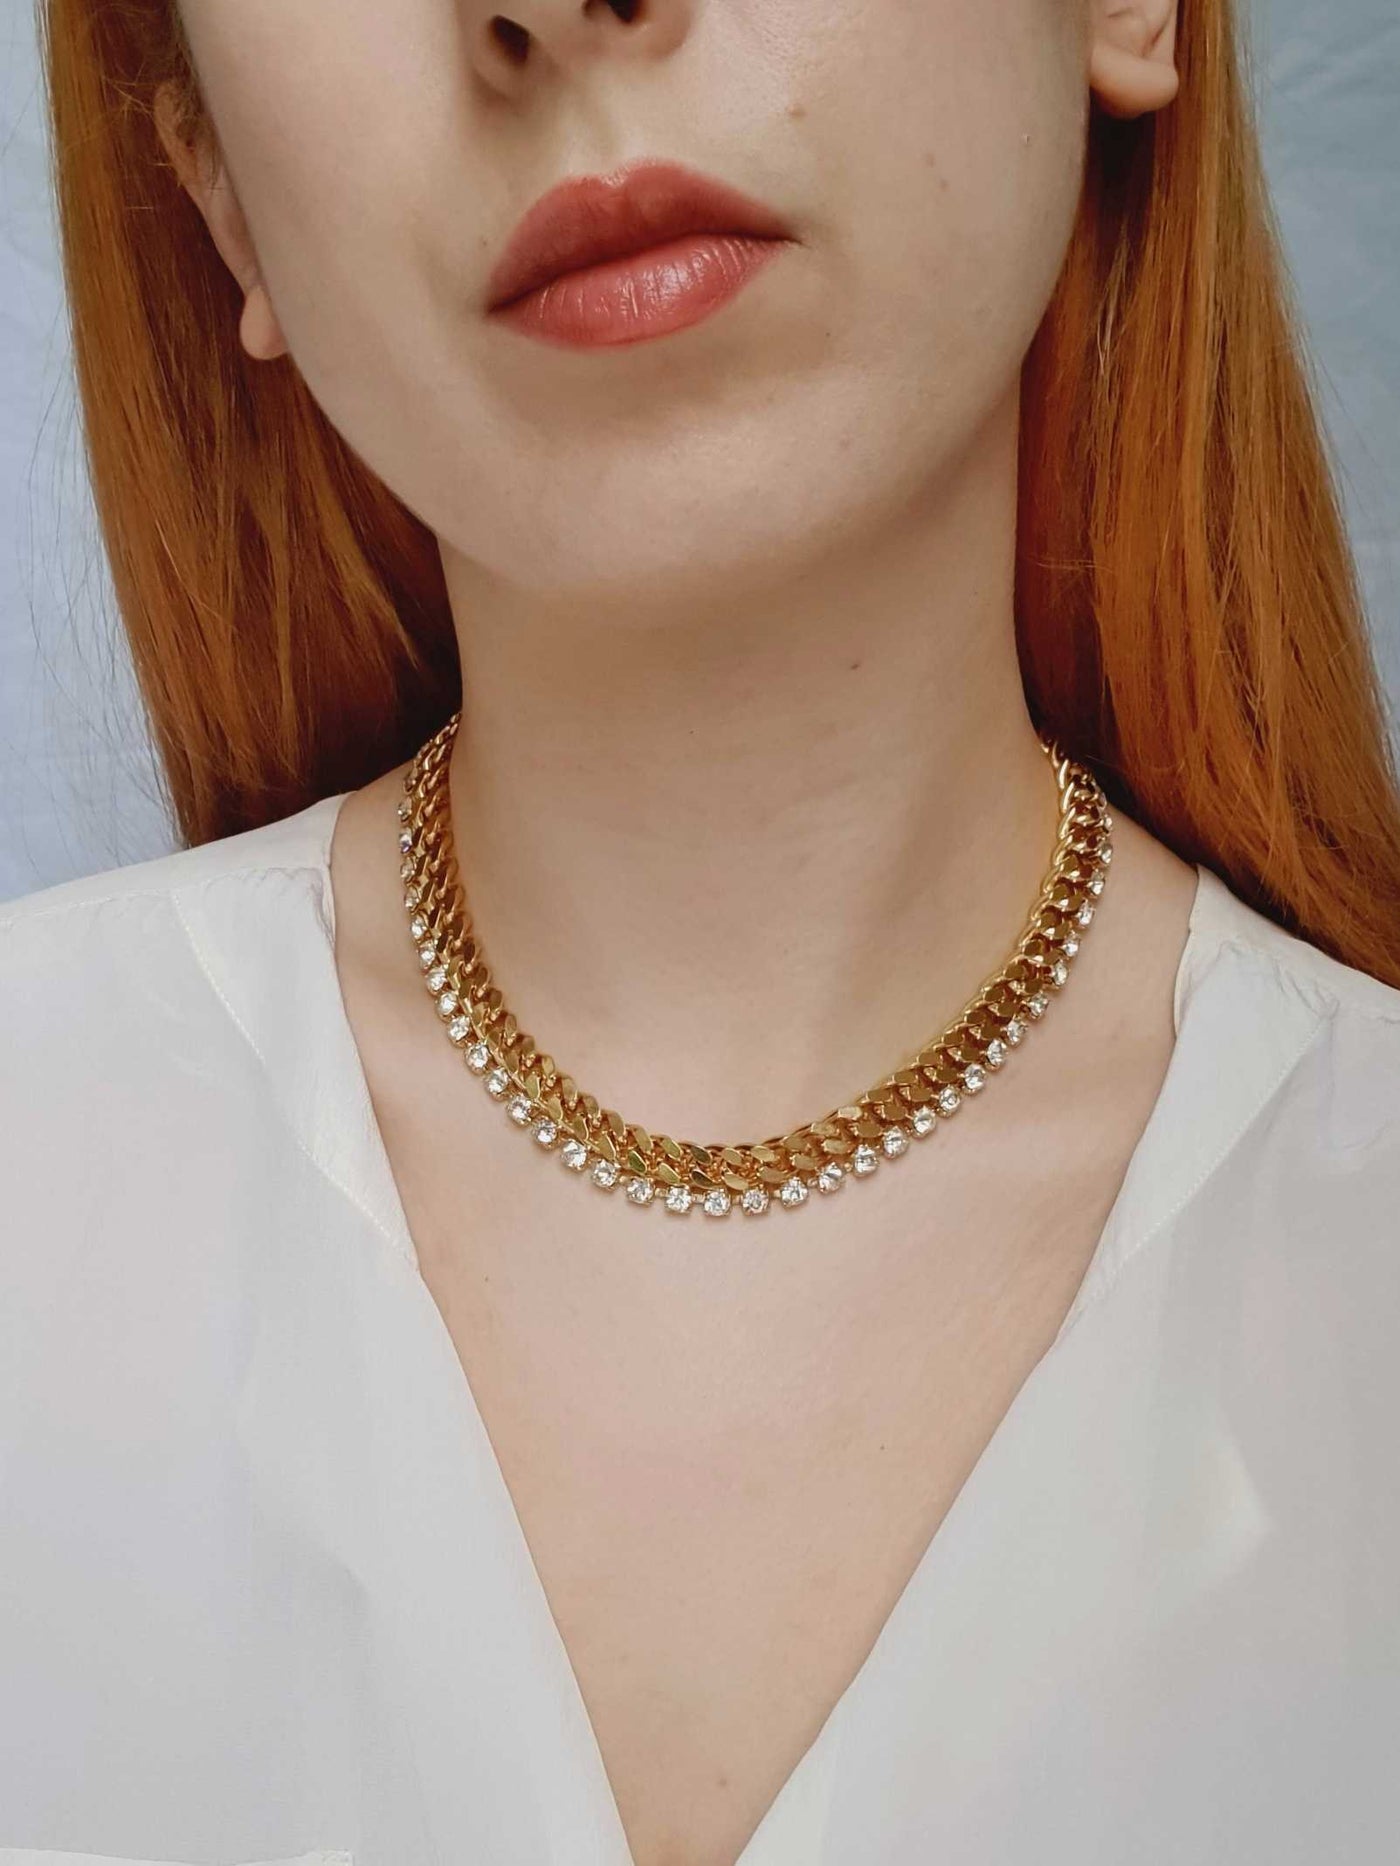 Vintage Gold Plated Chunky Crystal Necklace